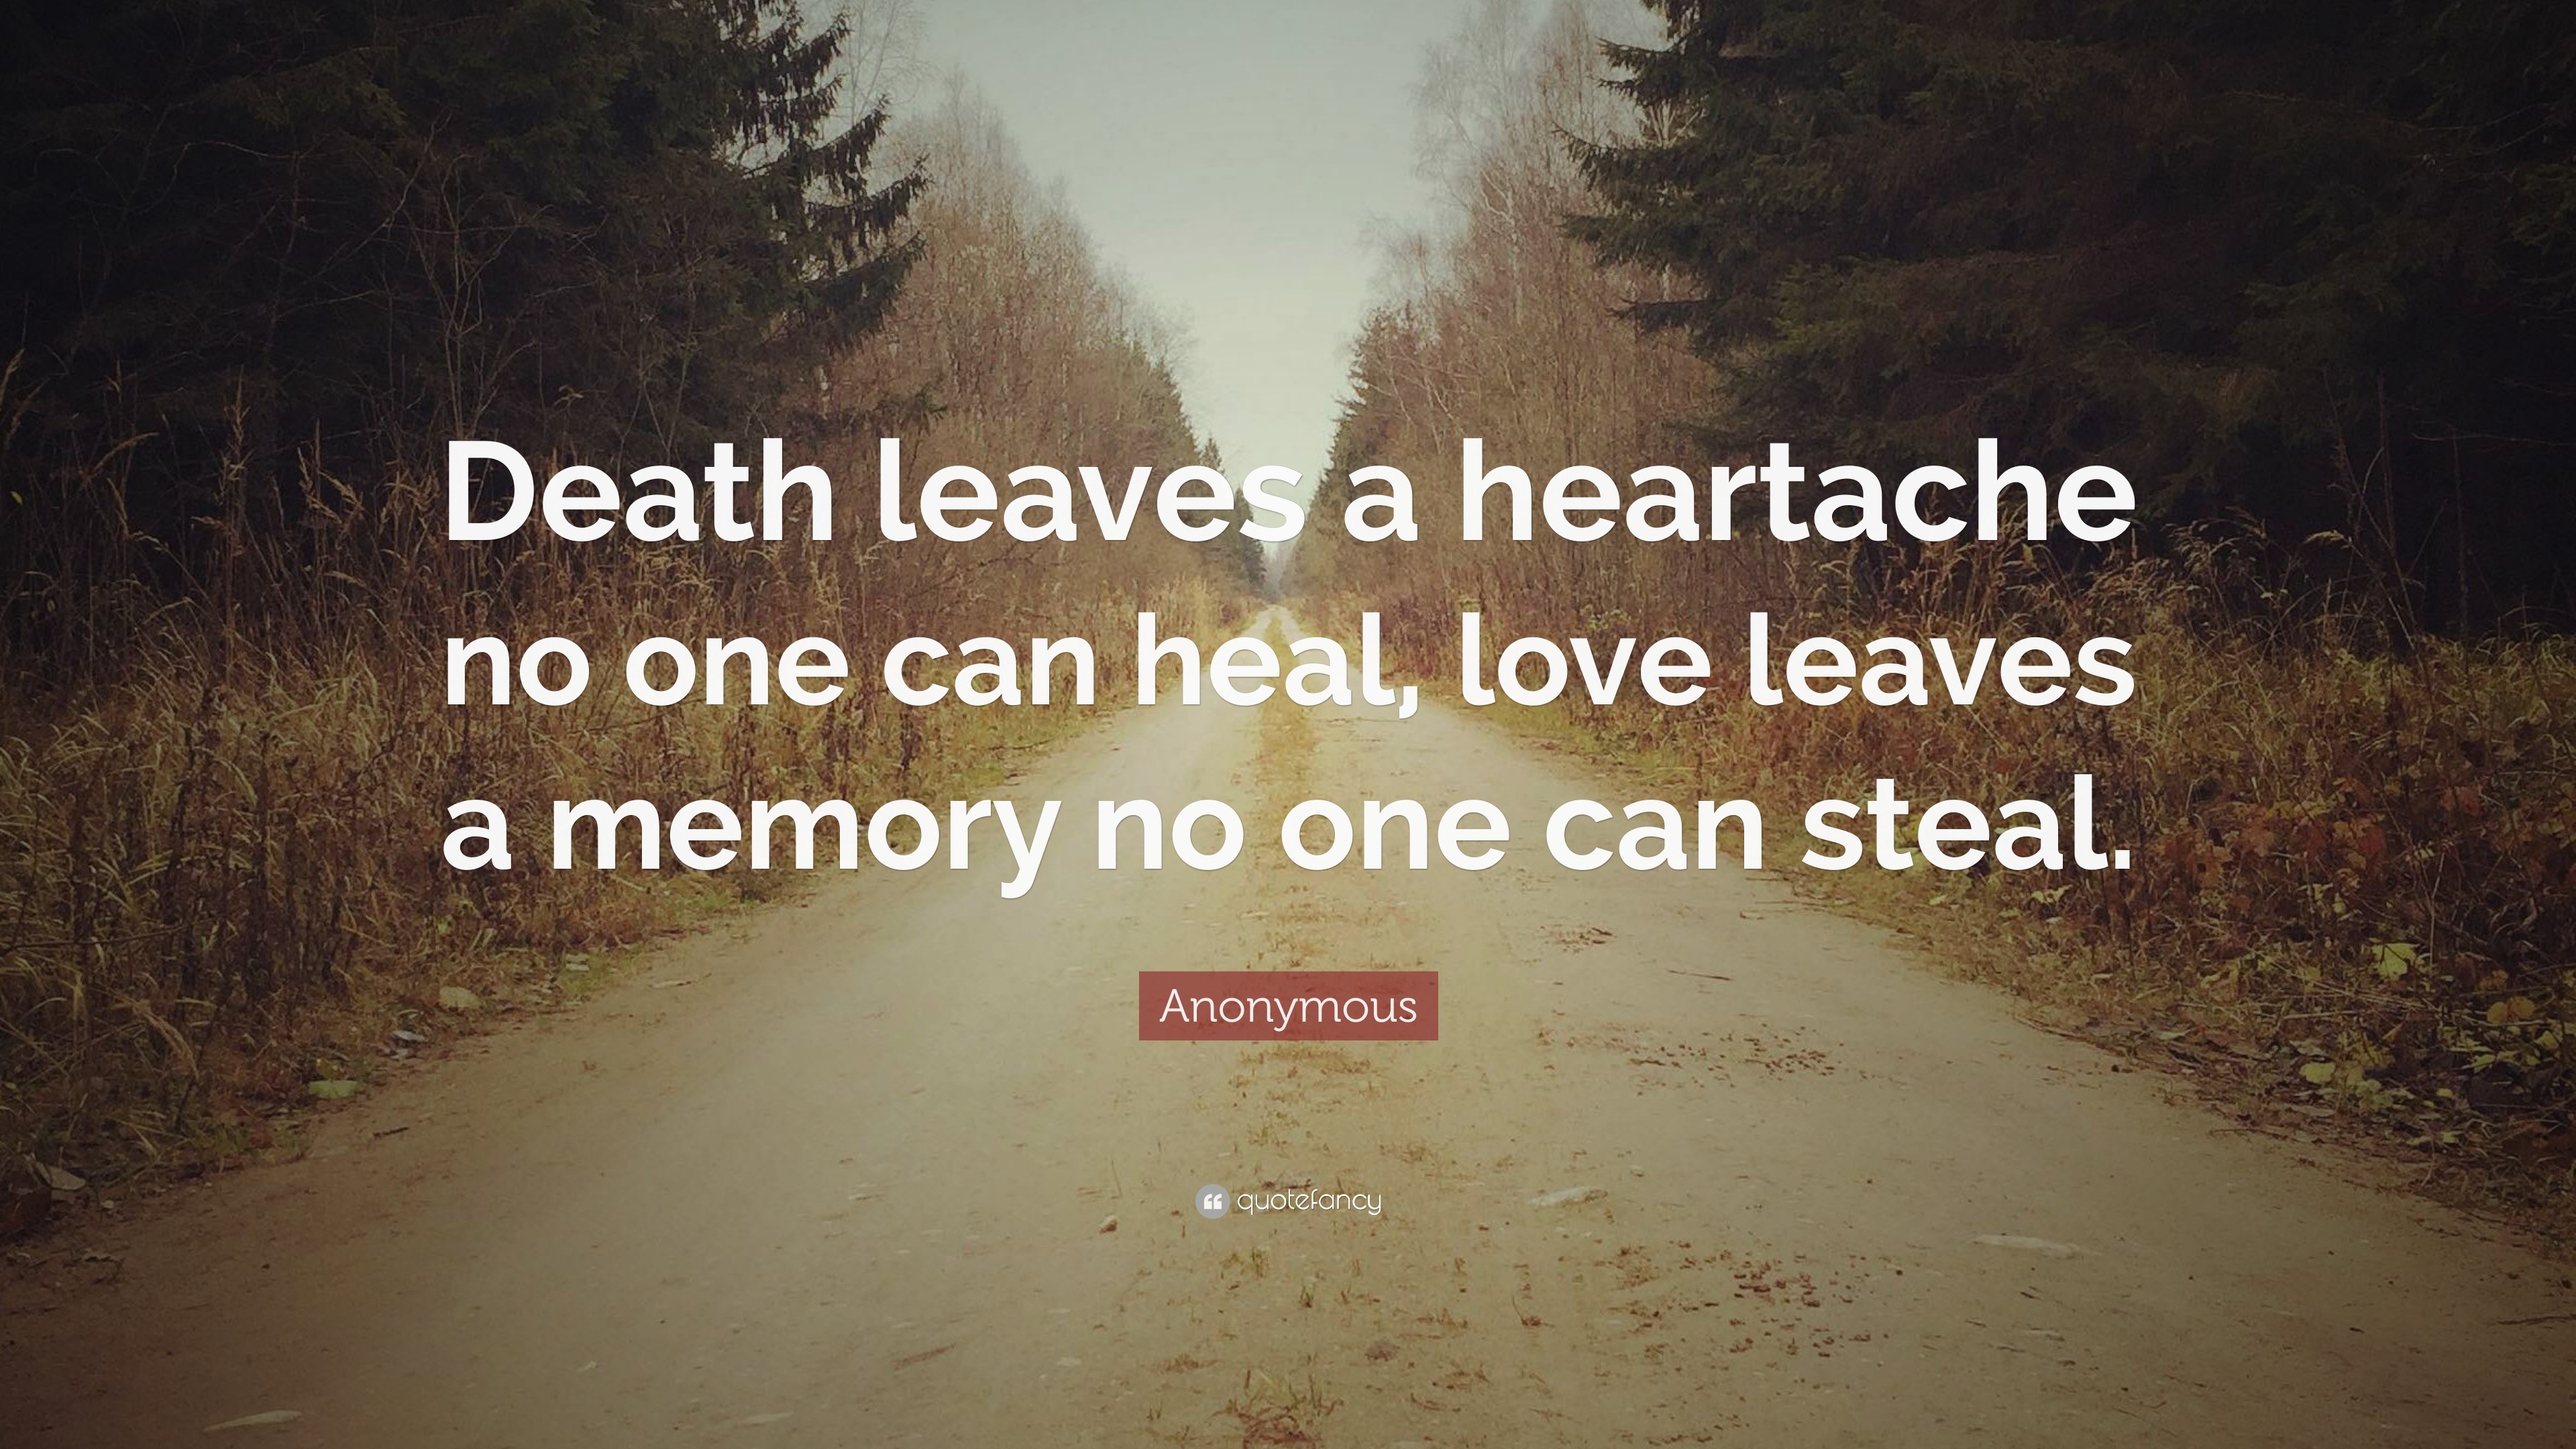 Anonymous Quote “Death leaves a heartache no one can heal love leaves a